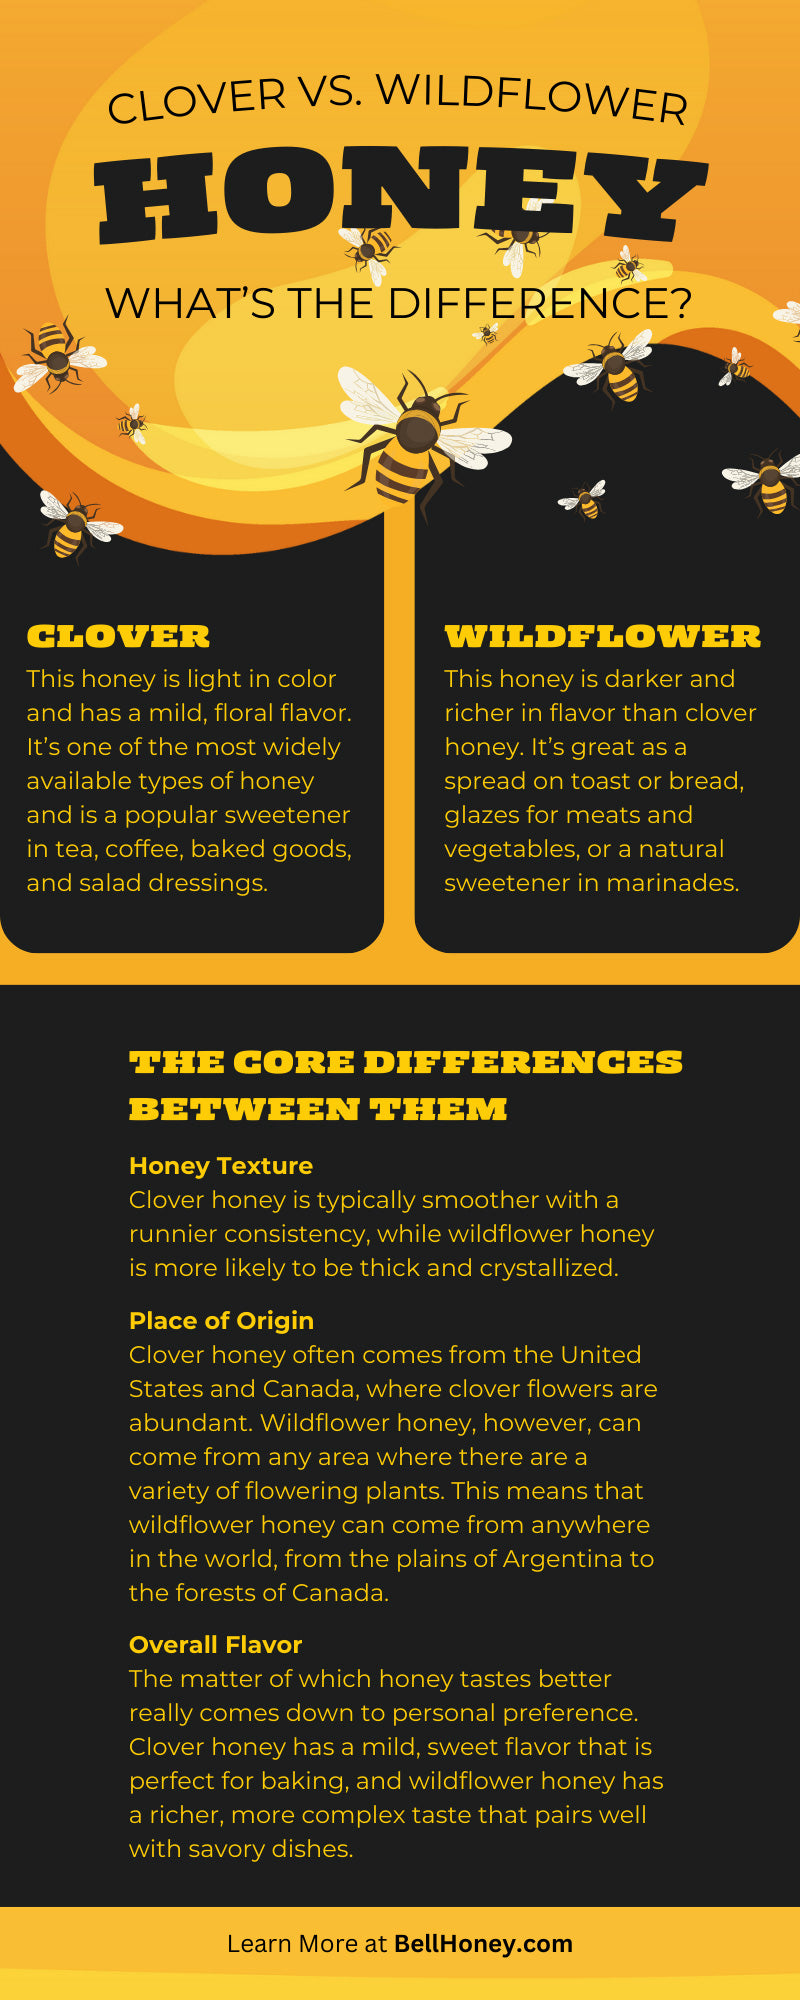 Clover vs. Wildflower Honey: What’s the Difference?